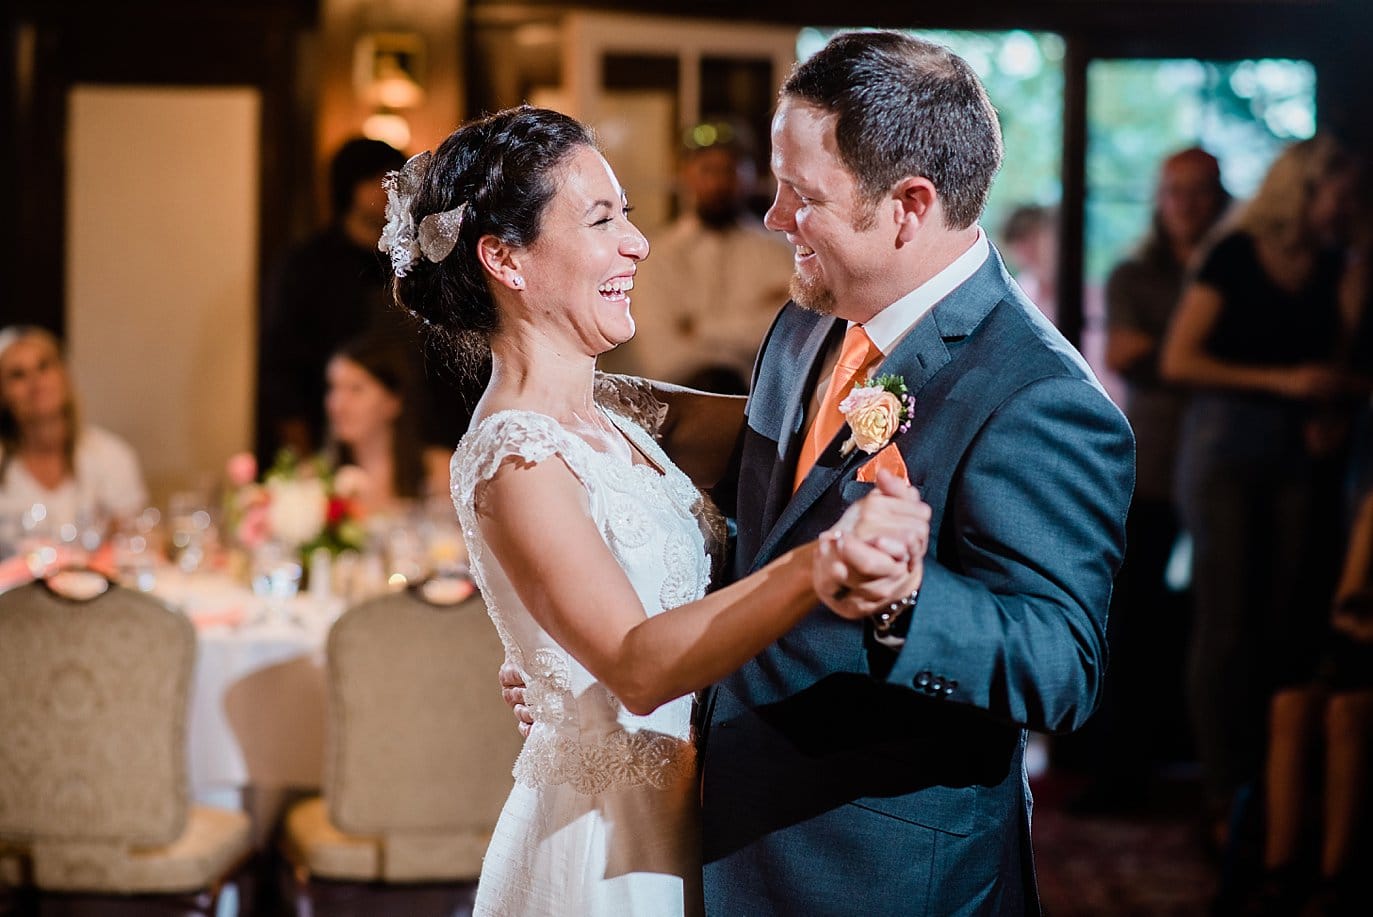 bride and groom first dance at The Stanley Hotel wedding by Estes Park wedding photographer Jennie Crate